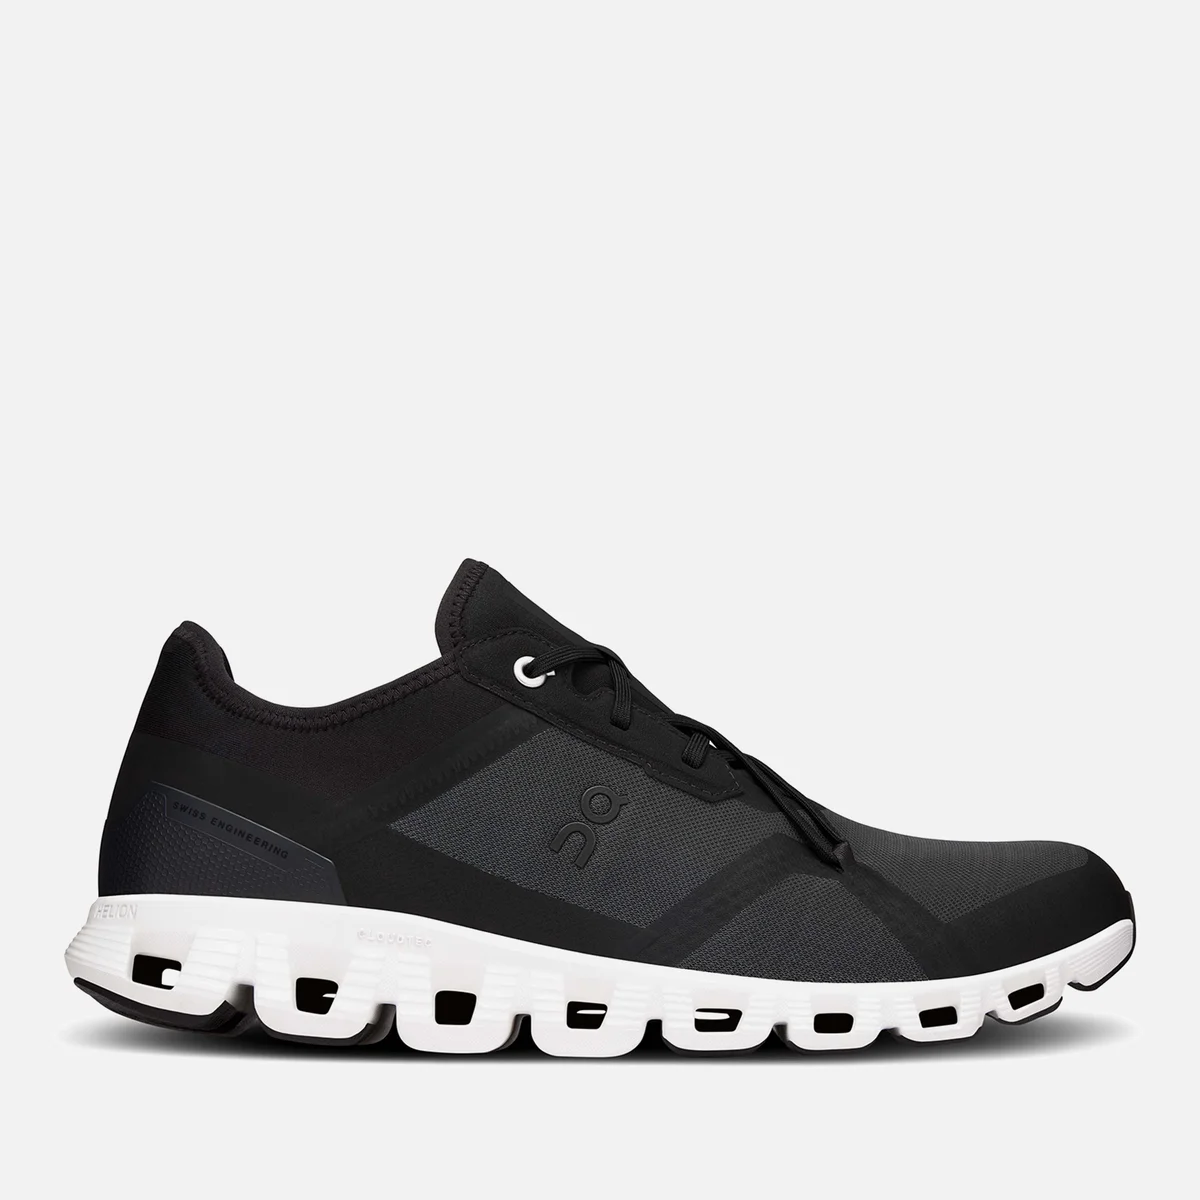 ON Men's Cloud X Mesh Running Trainers Image 1